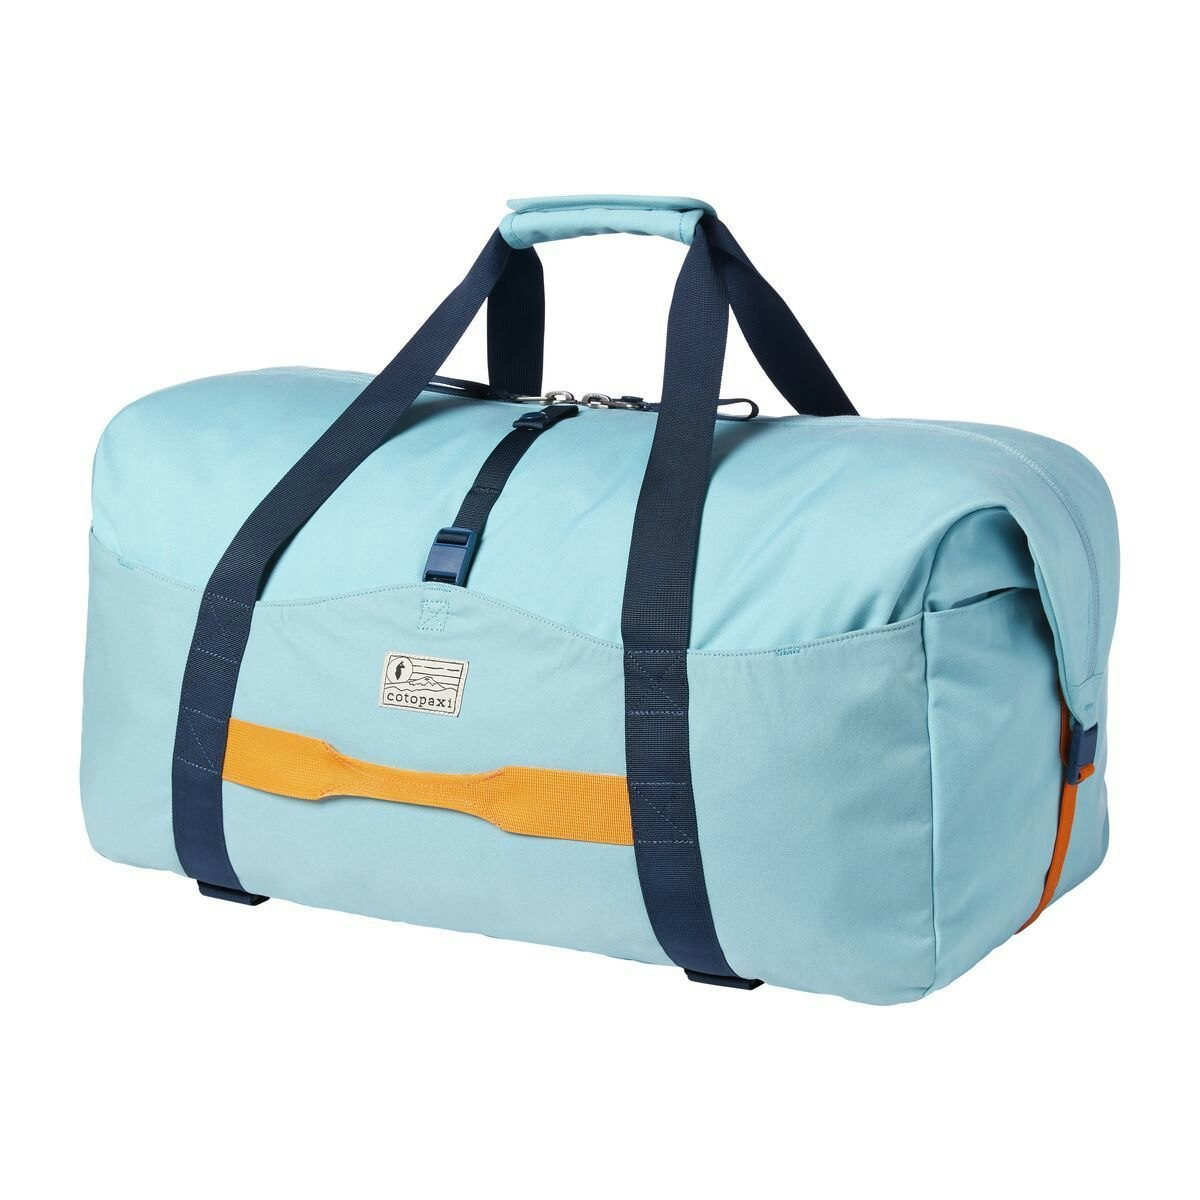 Cotopaxi's 50L Camello duffel, light blue with dark blue top handles and a yellow front handle, on a white background